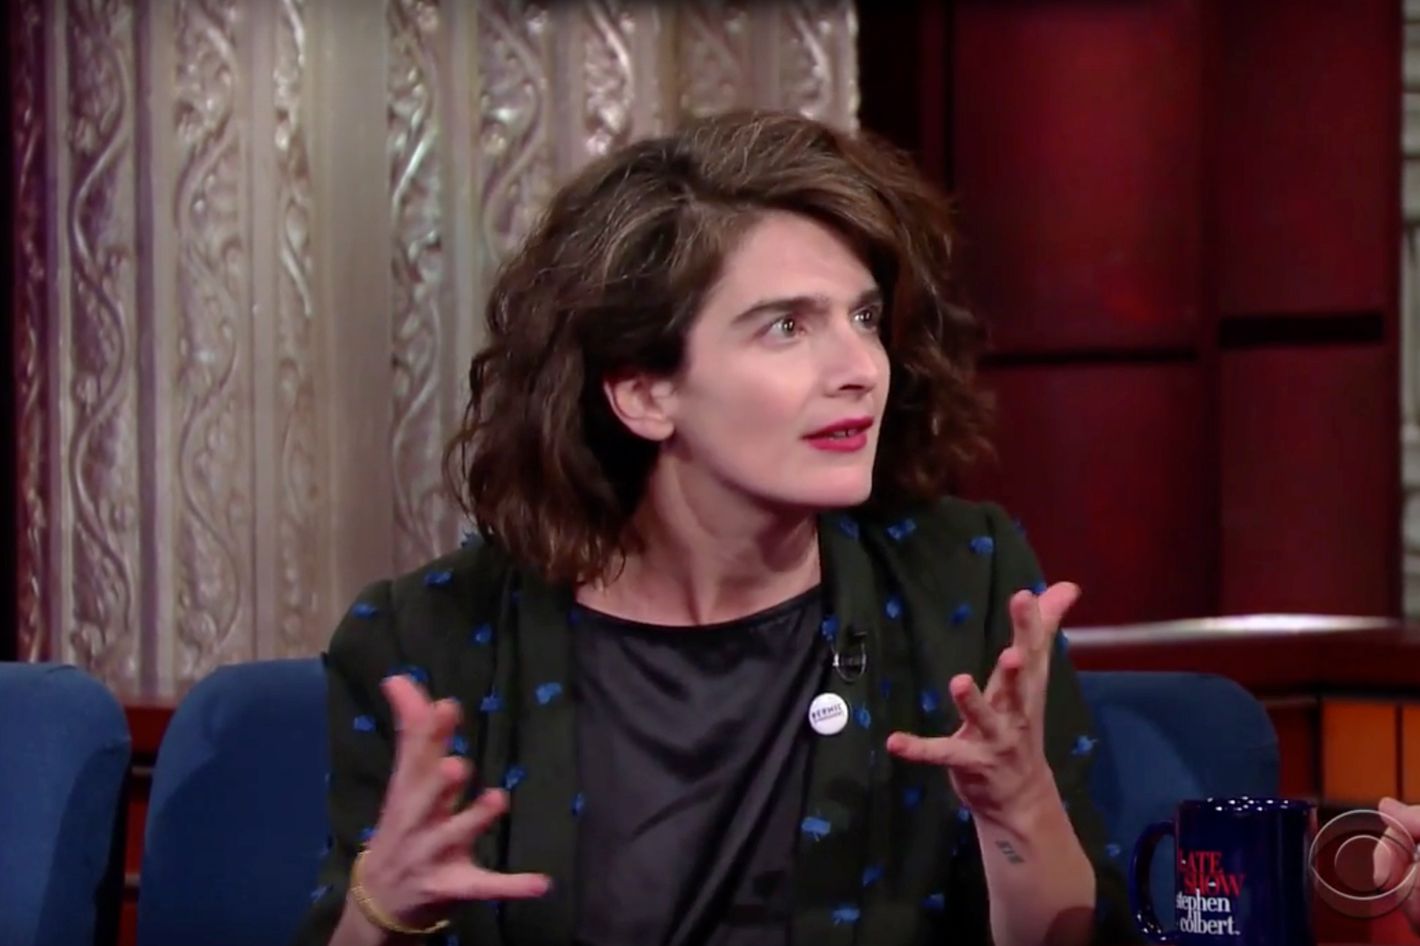 Gaby Hoffmann eats her placenta, but doctors say proceed with caution